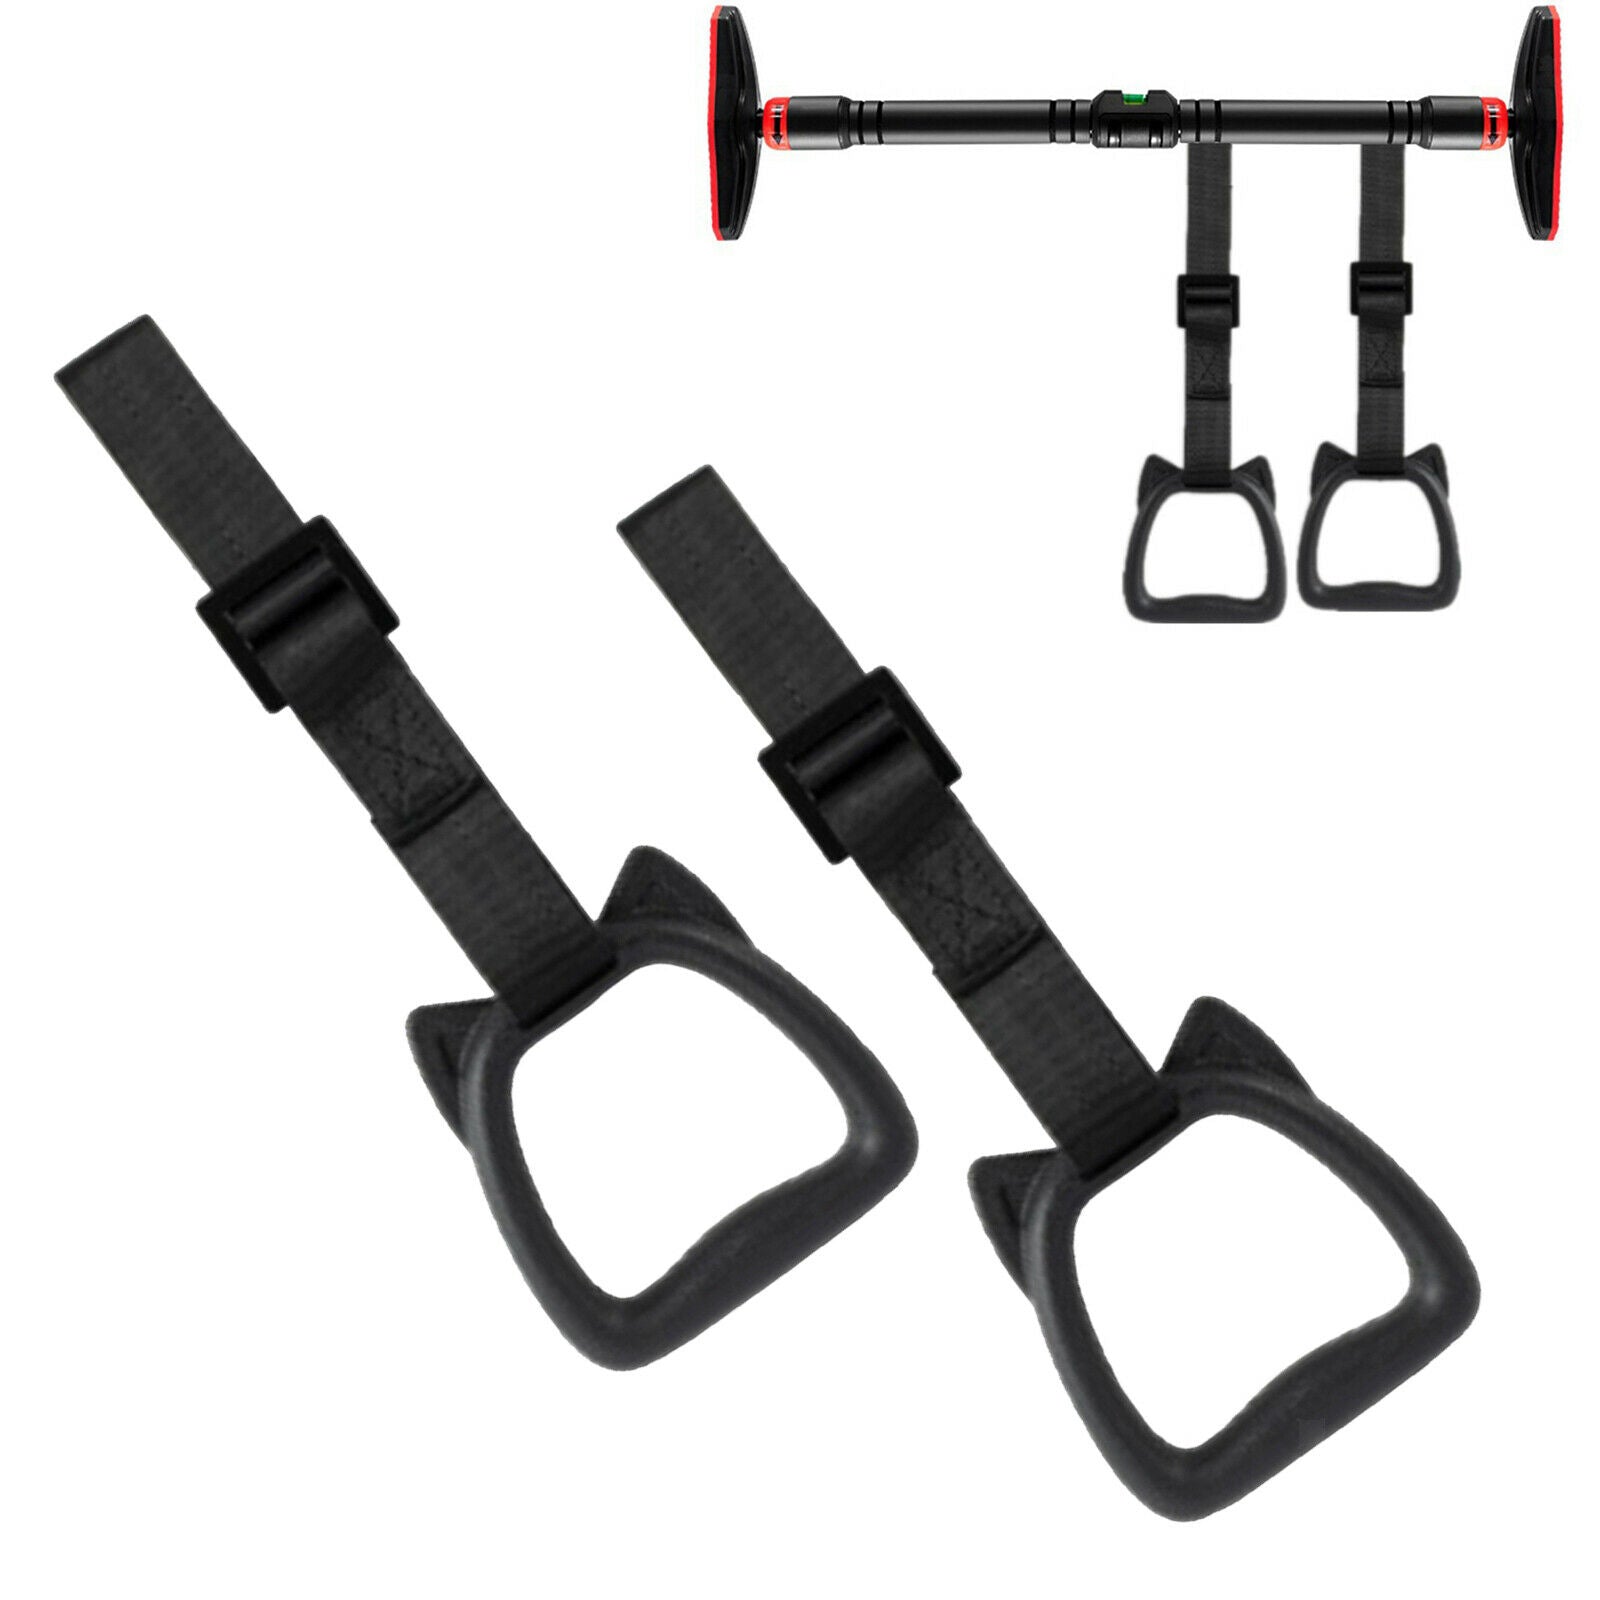 Heavy Duty Pull-Up Straps Handles Fitness Training Chinning Bar Attachment